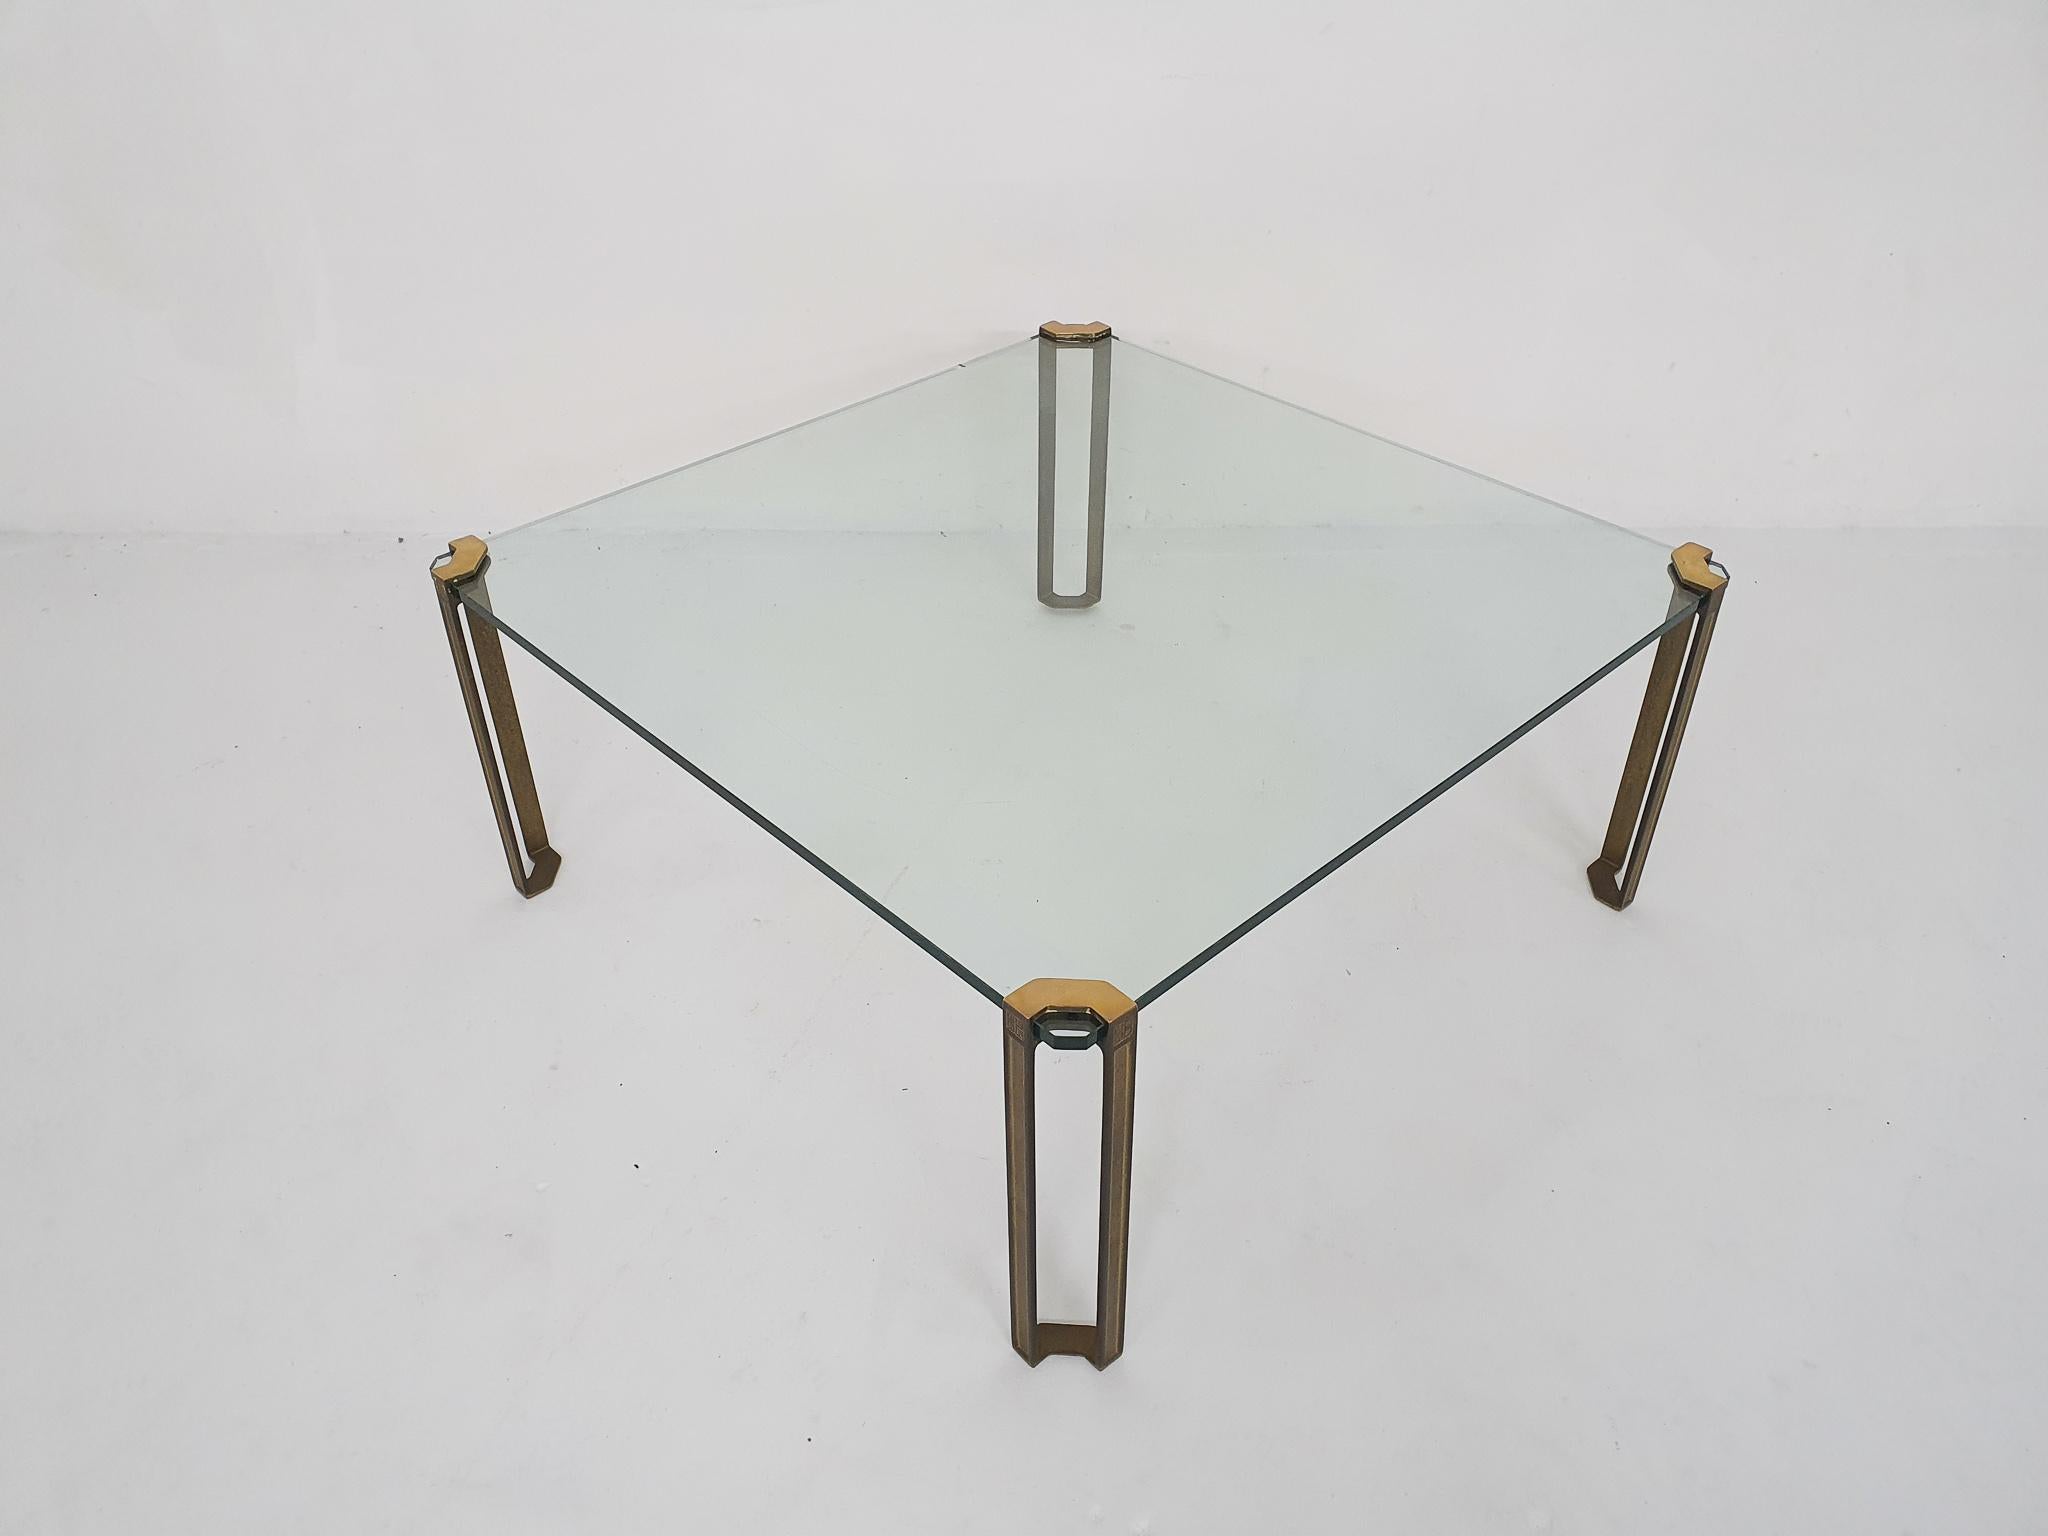 Square coffee table by Peter Ghyczy. Solid brass legs and a thick glass plate.
Architect and designer Peter Ghyczy, born in Hungary in 1940, graduated at the Technical University of Aachen. His most successful design was the Garden Egg Chair in